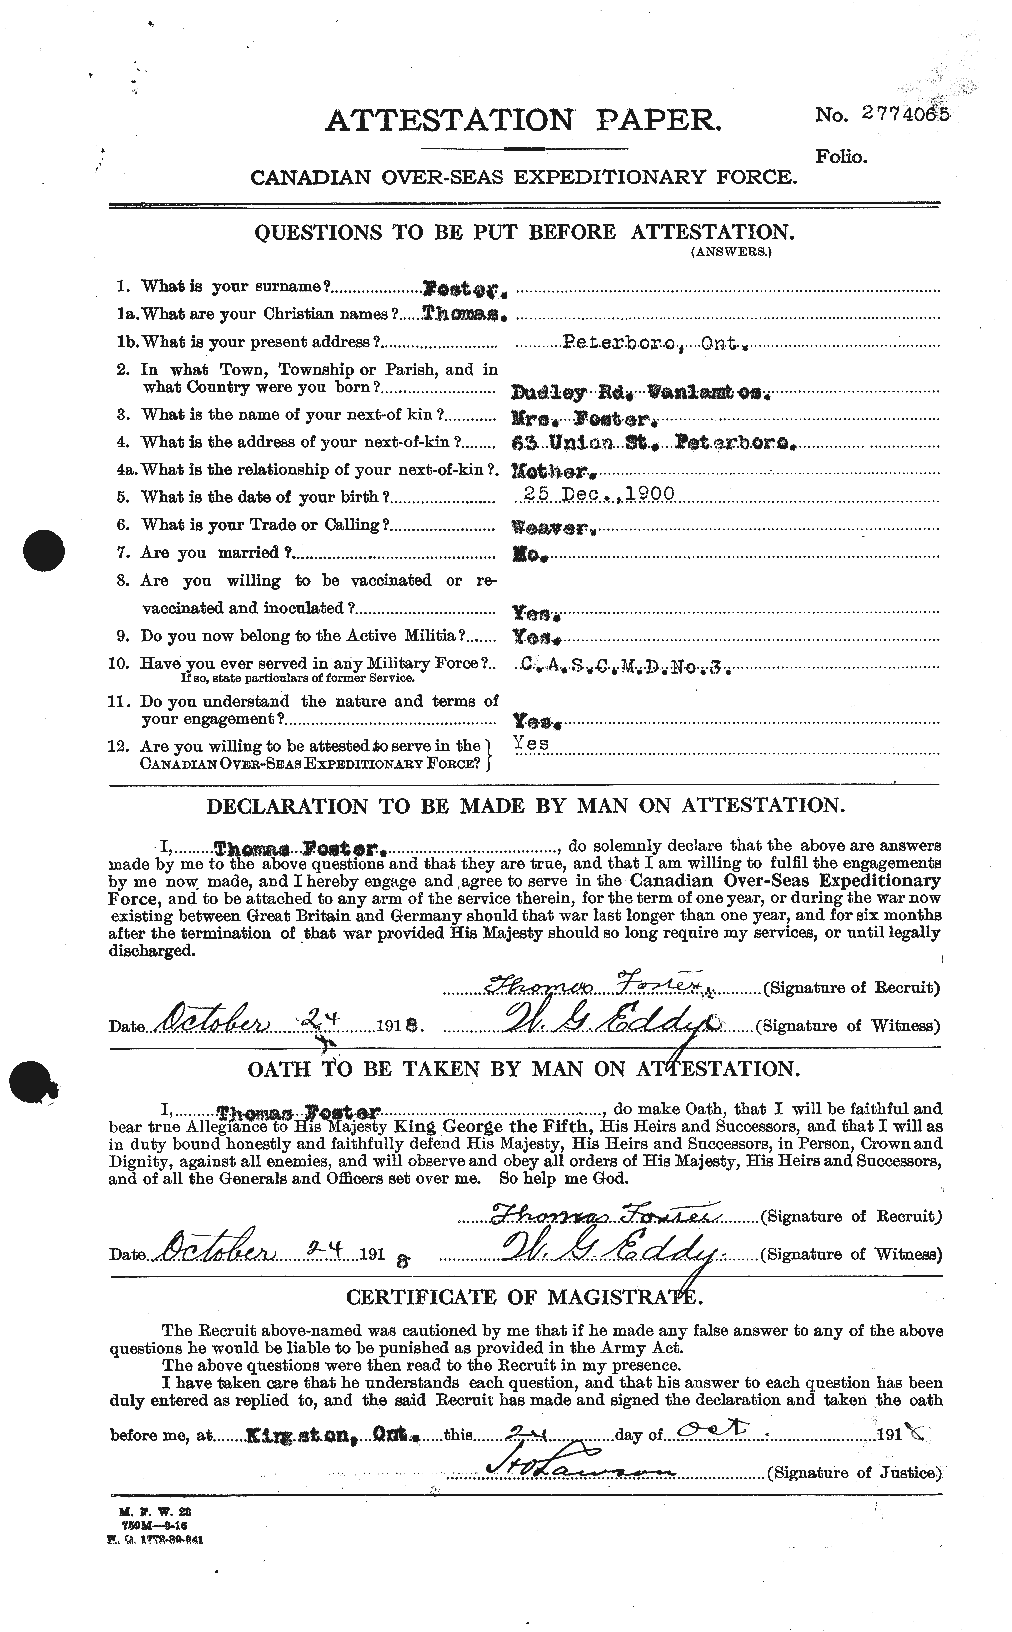 Personnel Records of the First World War - CEF 335220a